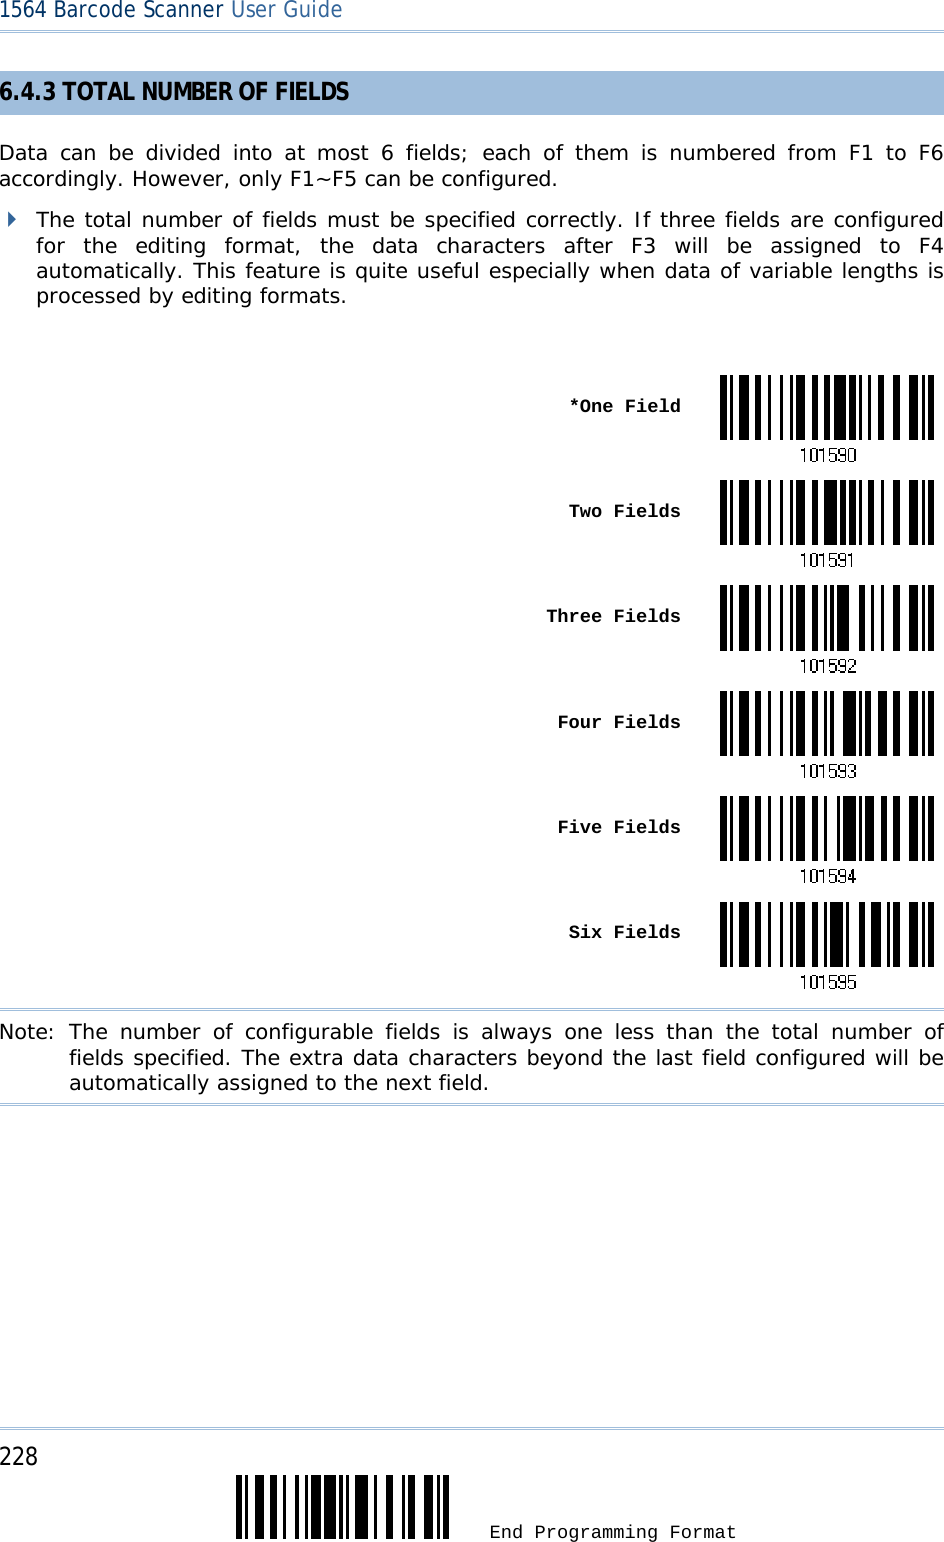 228  End Programming Format 1564 Barcode Scanner User Guide  6.4.3 TOTAL NUMBER OF FIELDS Data can be divided into at most 6 fields; each of them is numbered from F1 to F6 accordingly. However, only F1~F5 can be configured.   The total number of fields must be specified correctly. If three fields are configured for the editing format, the data characters after F3 will be assigned to F4 automatically. This feature is quite useful especially when data of variable lengths is processed by editing formats.   *One Field Two Fields Three Fields Four Fields Five Fields Six FieldsNote: The number of configurable fields is always one less than the total number of fields specified. The extra data characters beyond the last field configured will be automatically assigned to the next field.  